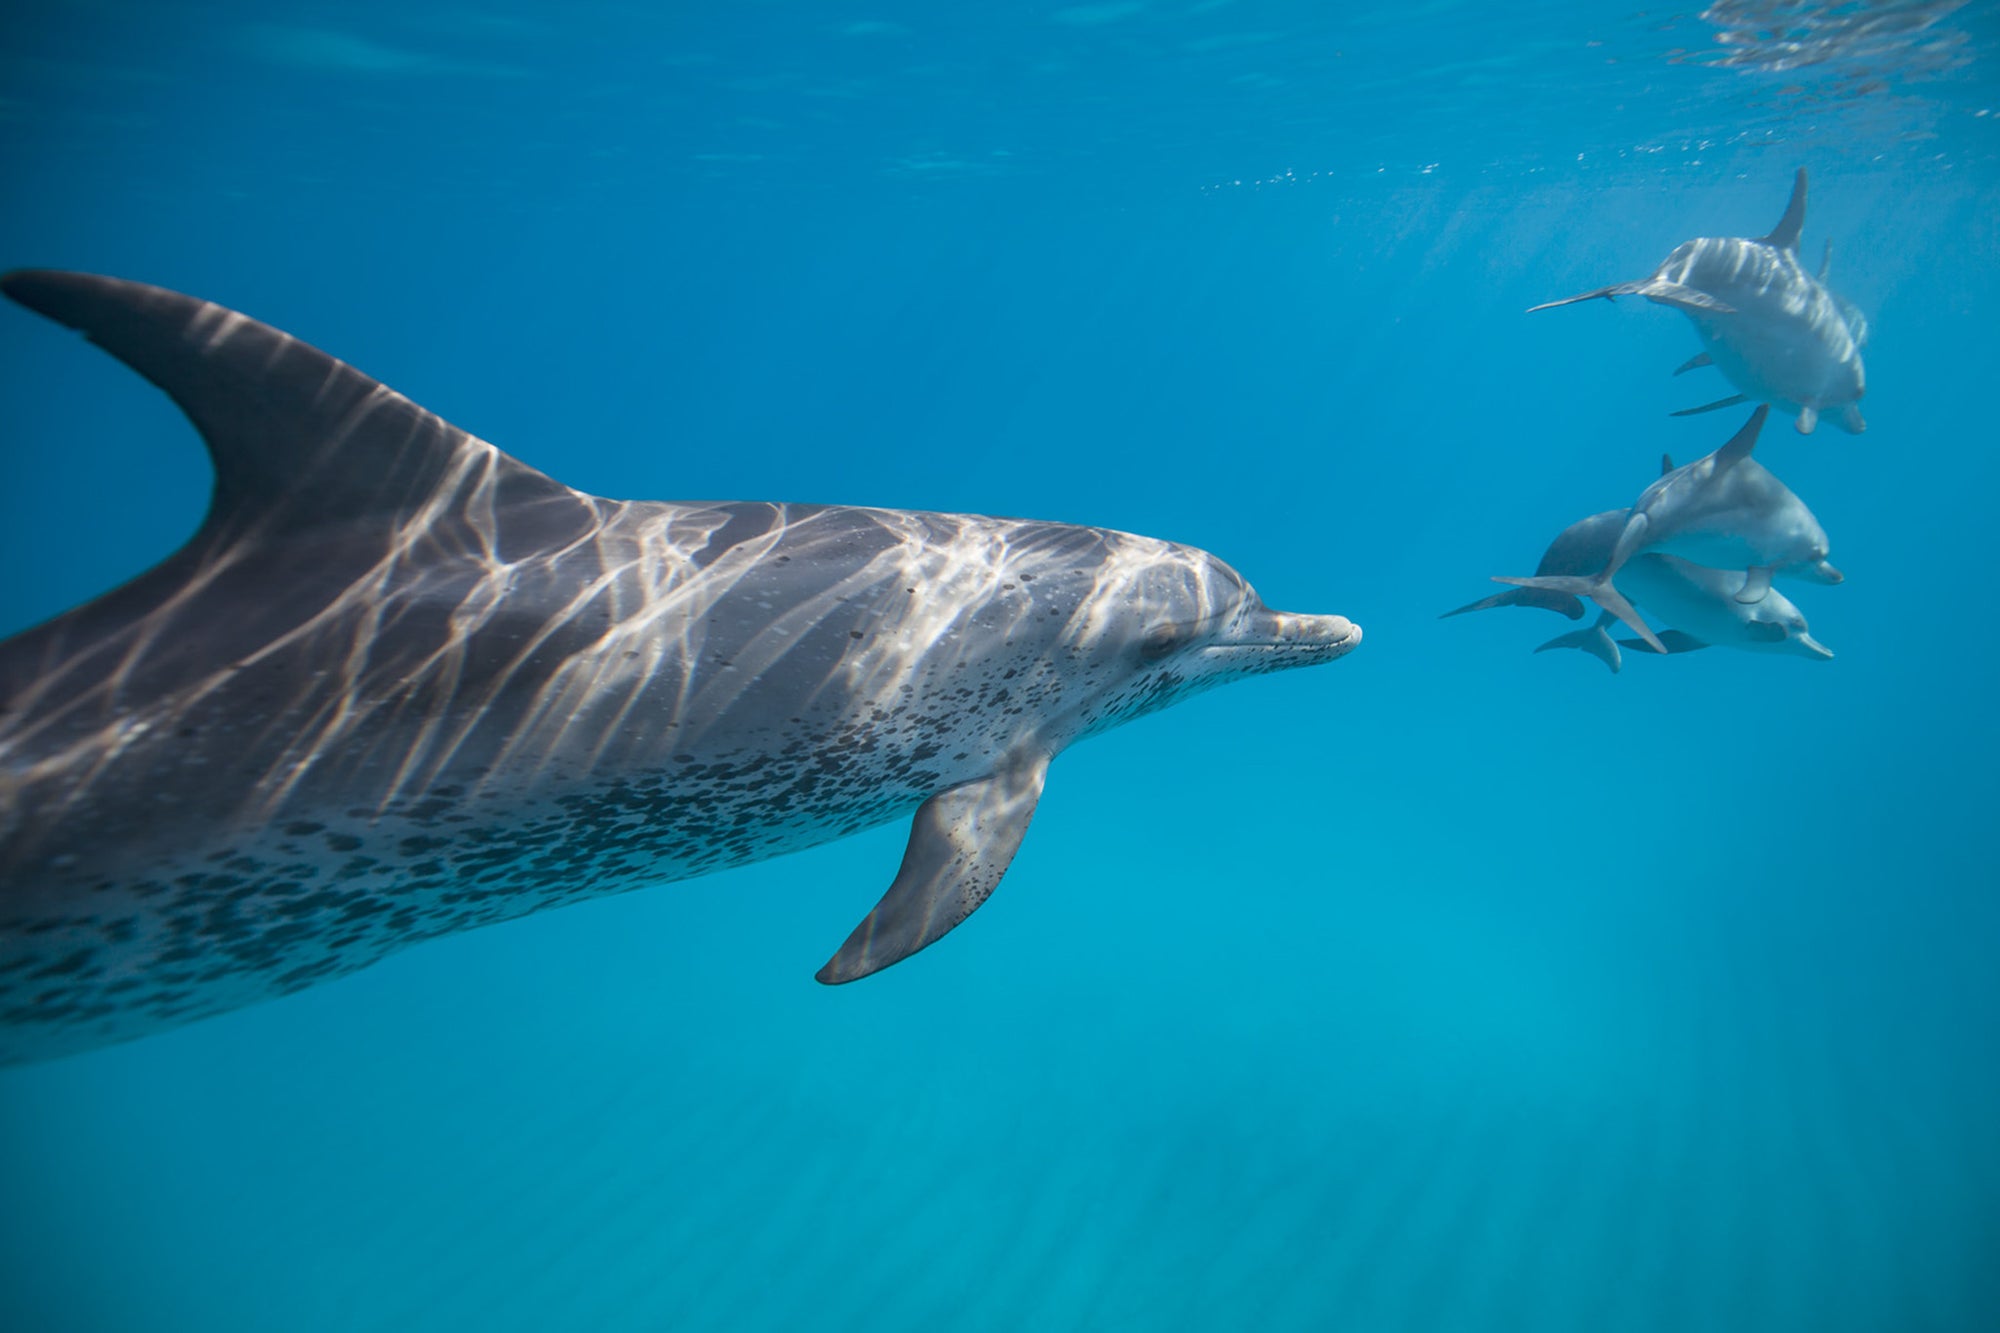 A group of spotted dolphins come close to the camera in the clear waters of the Bahamas.